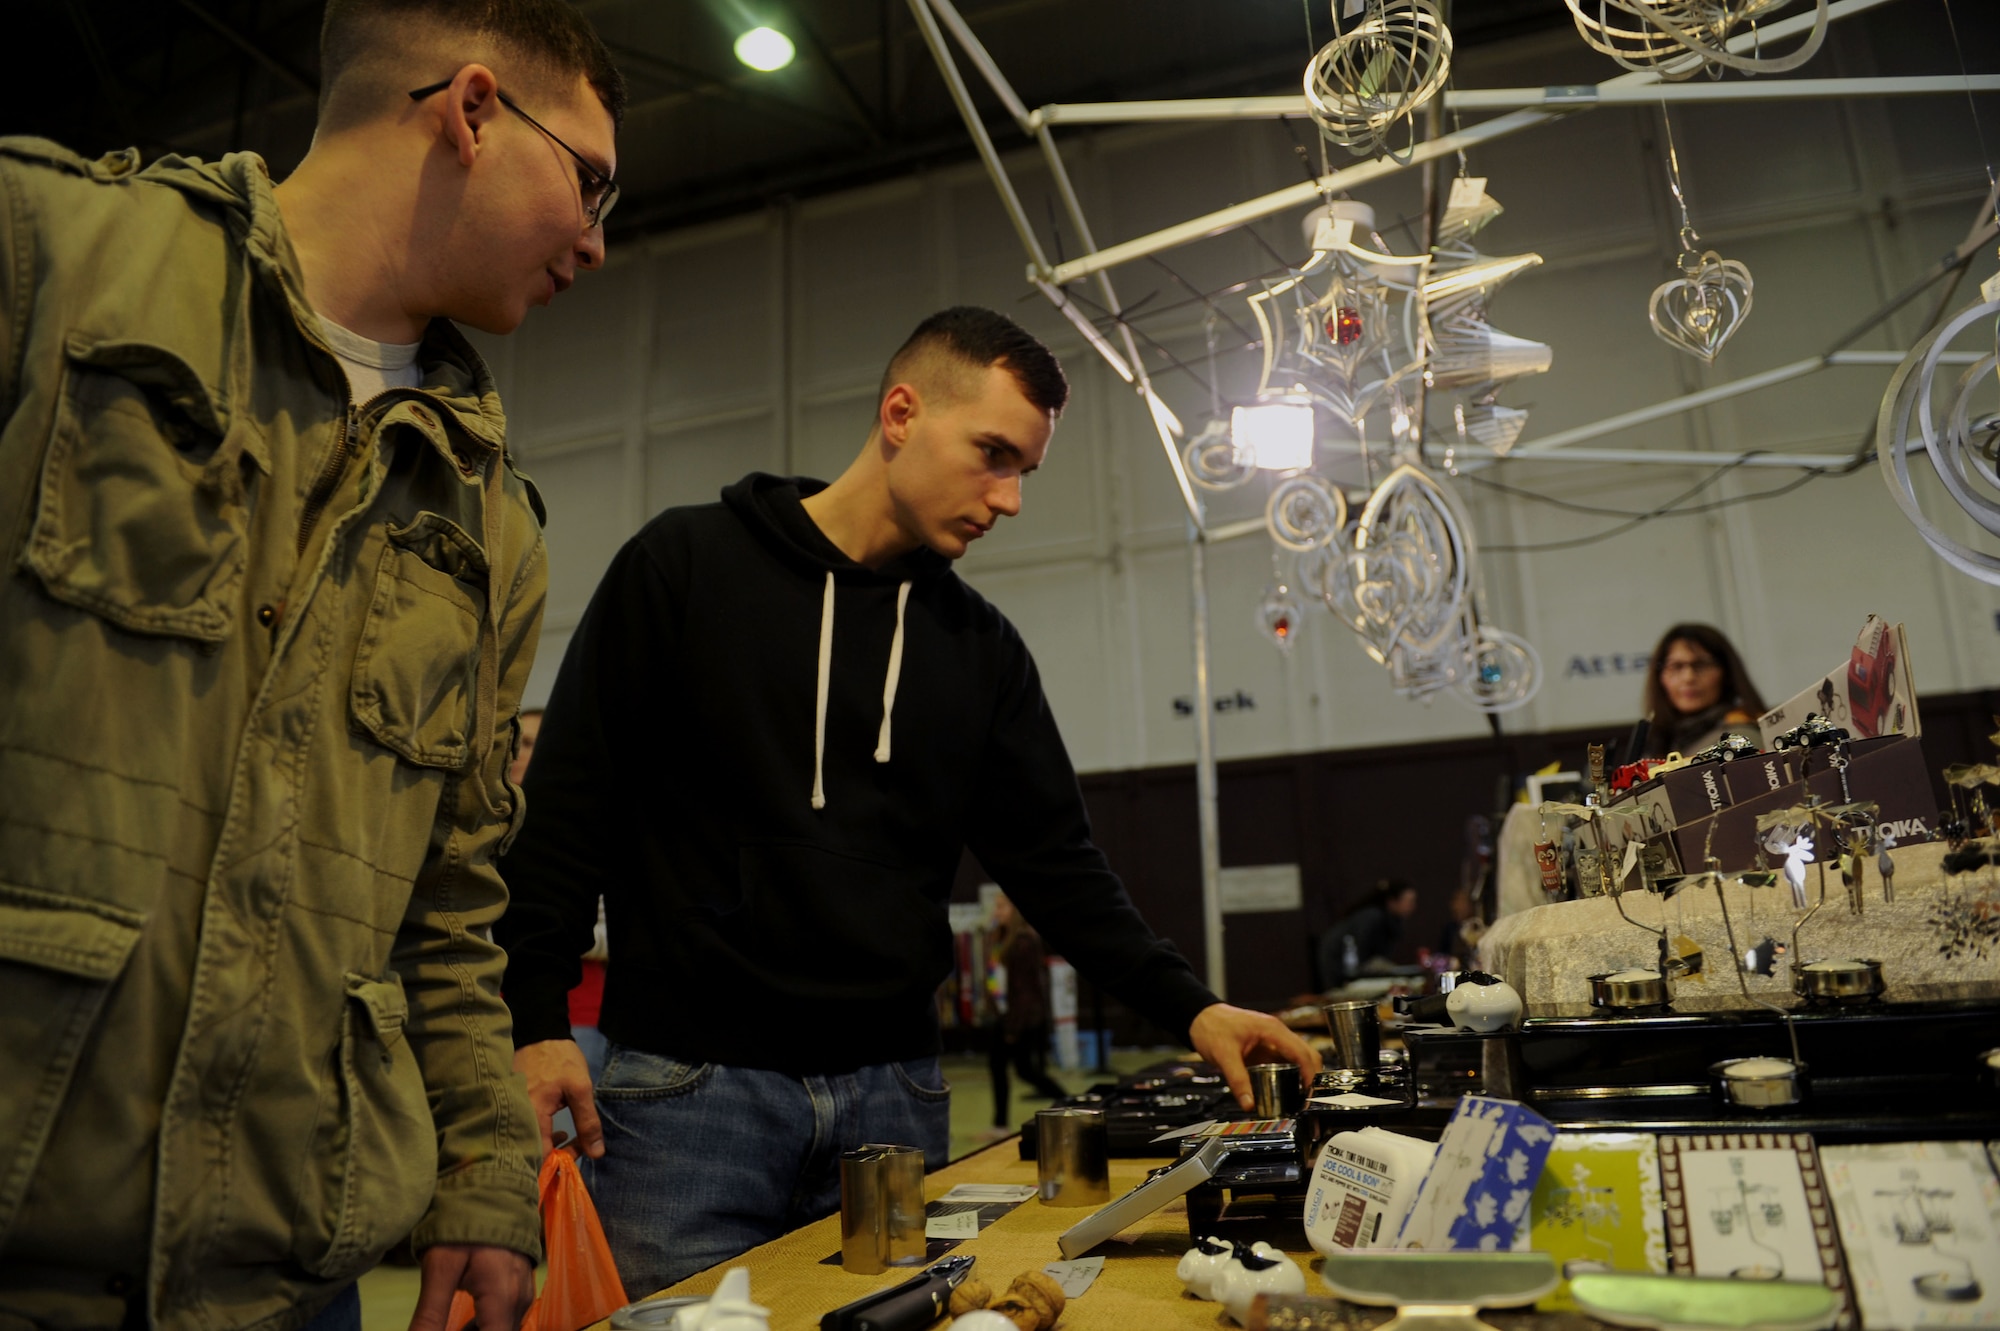 U.S. Air Force Airman 1st Class Antonio Villalobos from Phelan, Calif., left, and U.S. Air Force Airman 1st Class Matthew Hooks from Inverness, Fla., both 52nd Equipment Maintenance Squadron aerospace ground equipment journeymen, shop at a vendor’s stand during the 2014 Holiday Bazaar in Hangar 1 at Spangdahlem Air Base, Germany, Oct. 25, 2014. The bazaar allowed Spangdahlem Airmen and their families to interact with vendors from the local community and around Europe. (U.S. Air Force photo by Airman 1st Class Timothy Kim/Released)